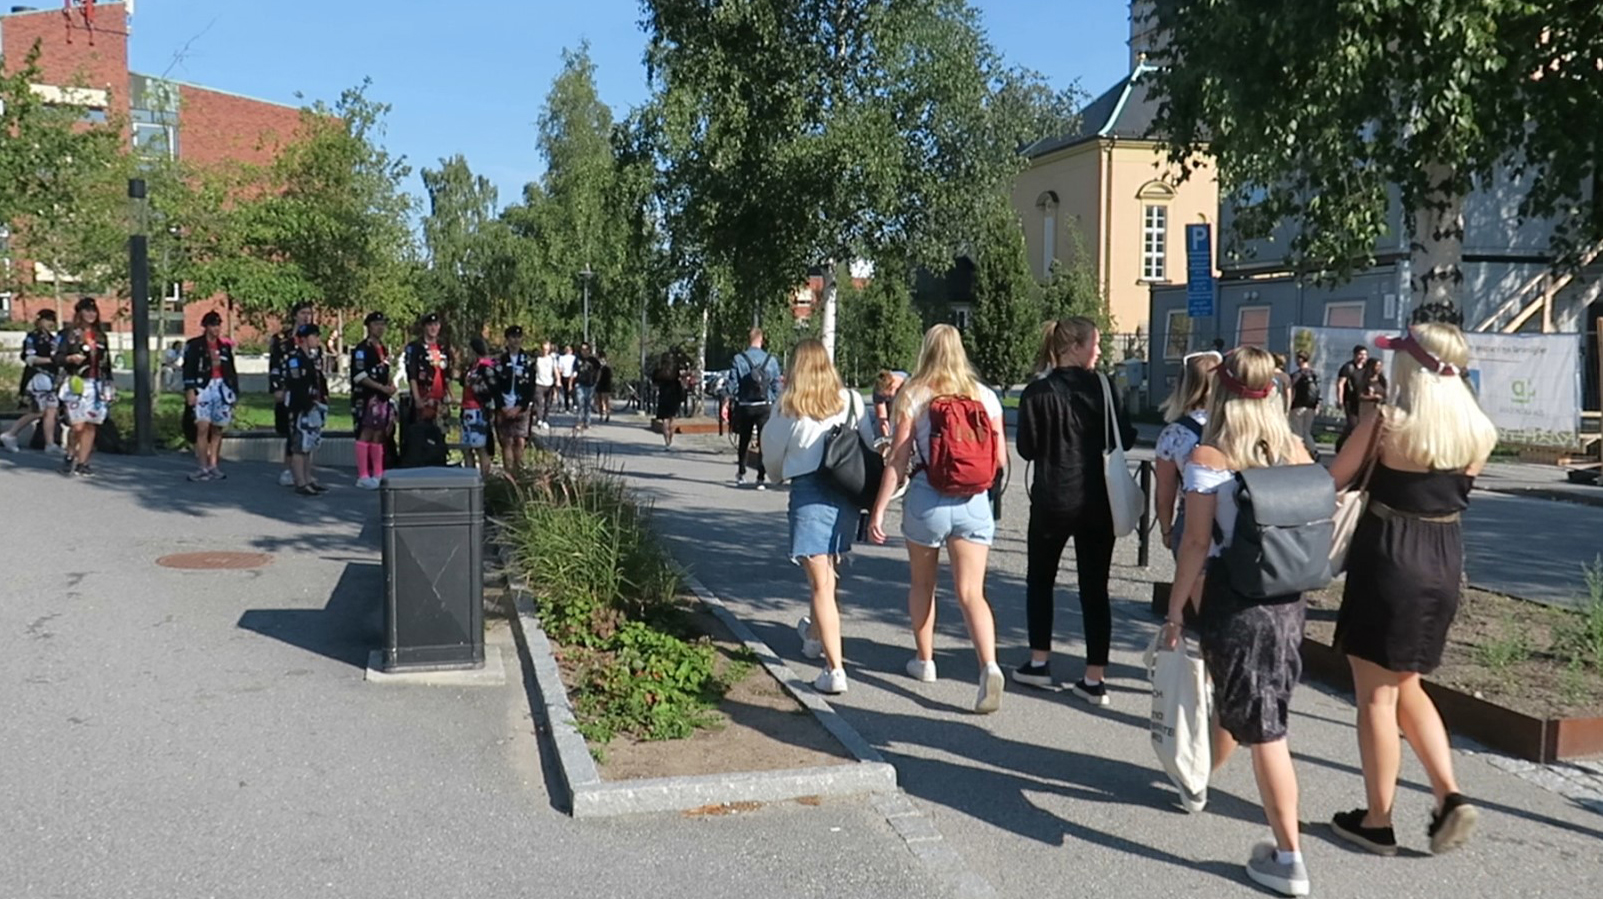 Students walking on campus in Stockholm